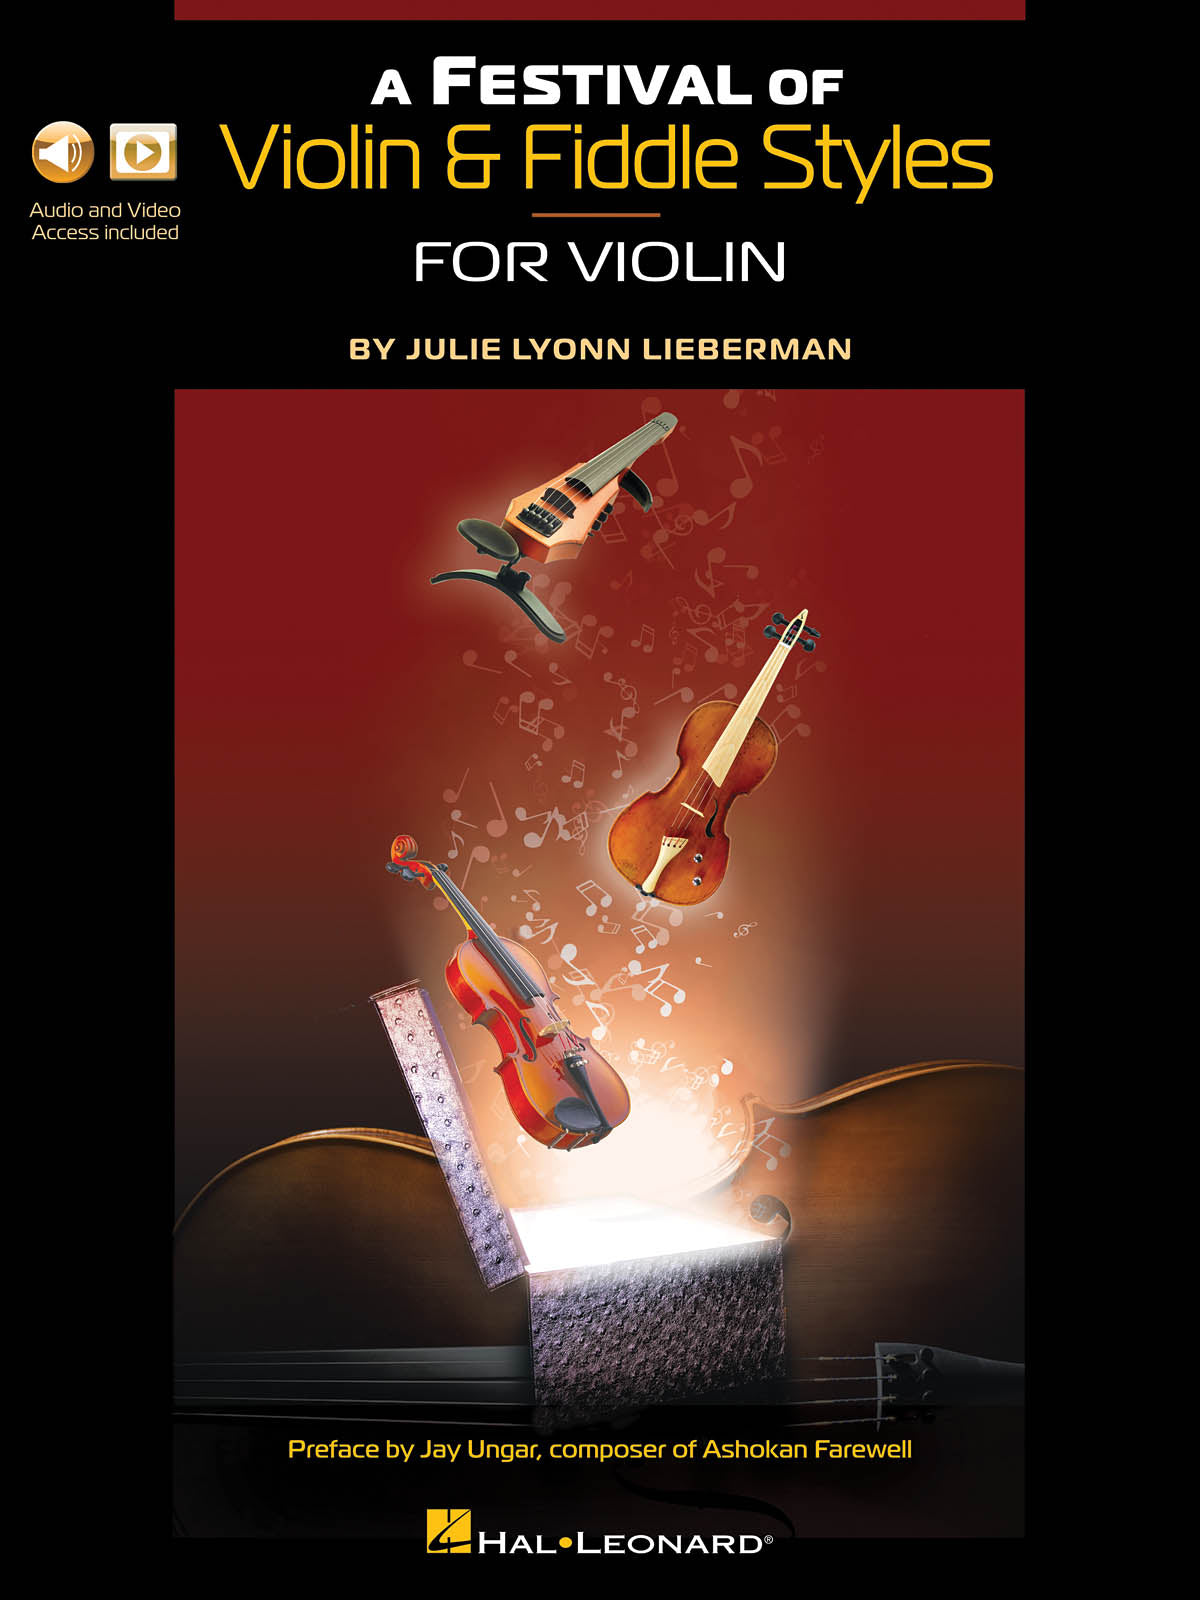 Image 1 of A Festival of Violin & Fiddle Styles for Violin - SKU# 49-298177 : Product Type Media : Elderly Instruments